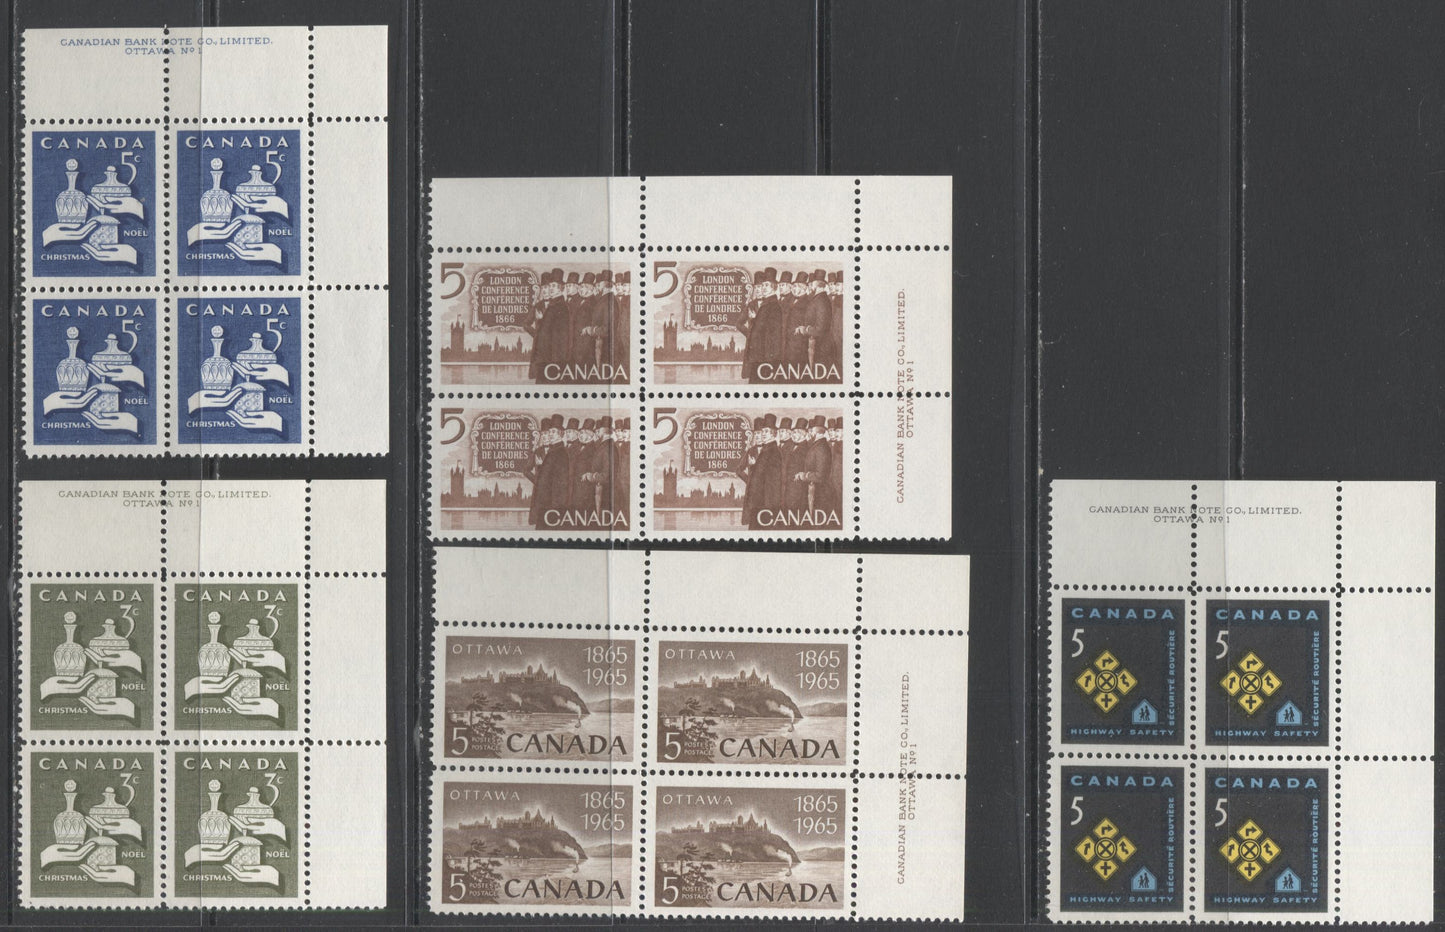 Lot 37 Canada #442-451 3c & 5c Brown - Carmine Rose Canadian Parliament - Praying Hands, 1965-1966 Commemoratives, 11 VFNH UR and LR Plates 1-3 Blocks Of 4, 448 is on DF-fl Paper